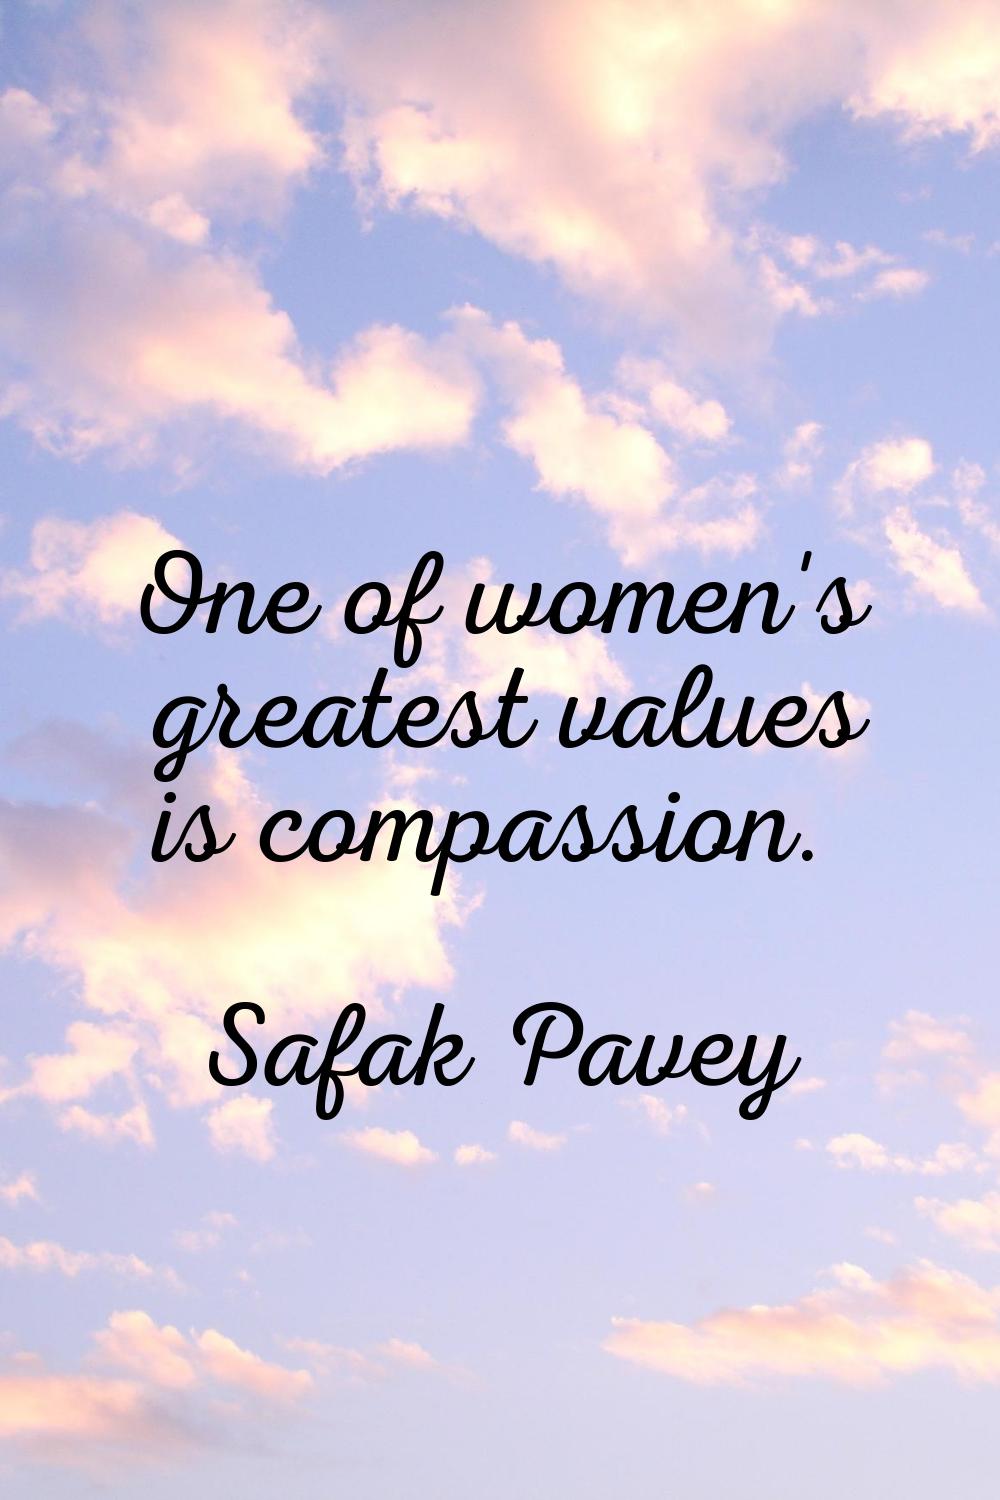 One of women's greatest values is compassion.